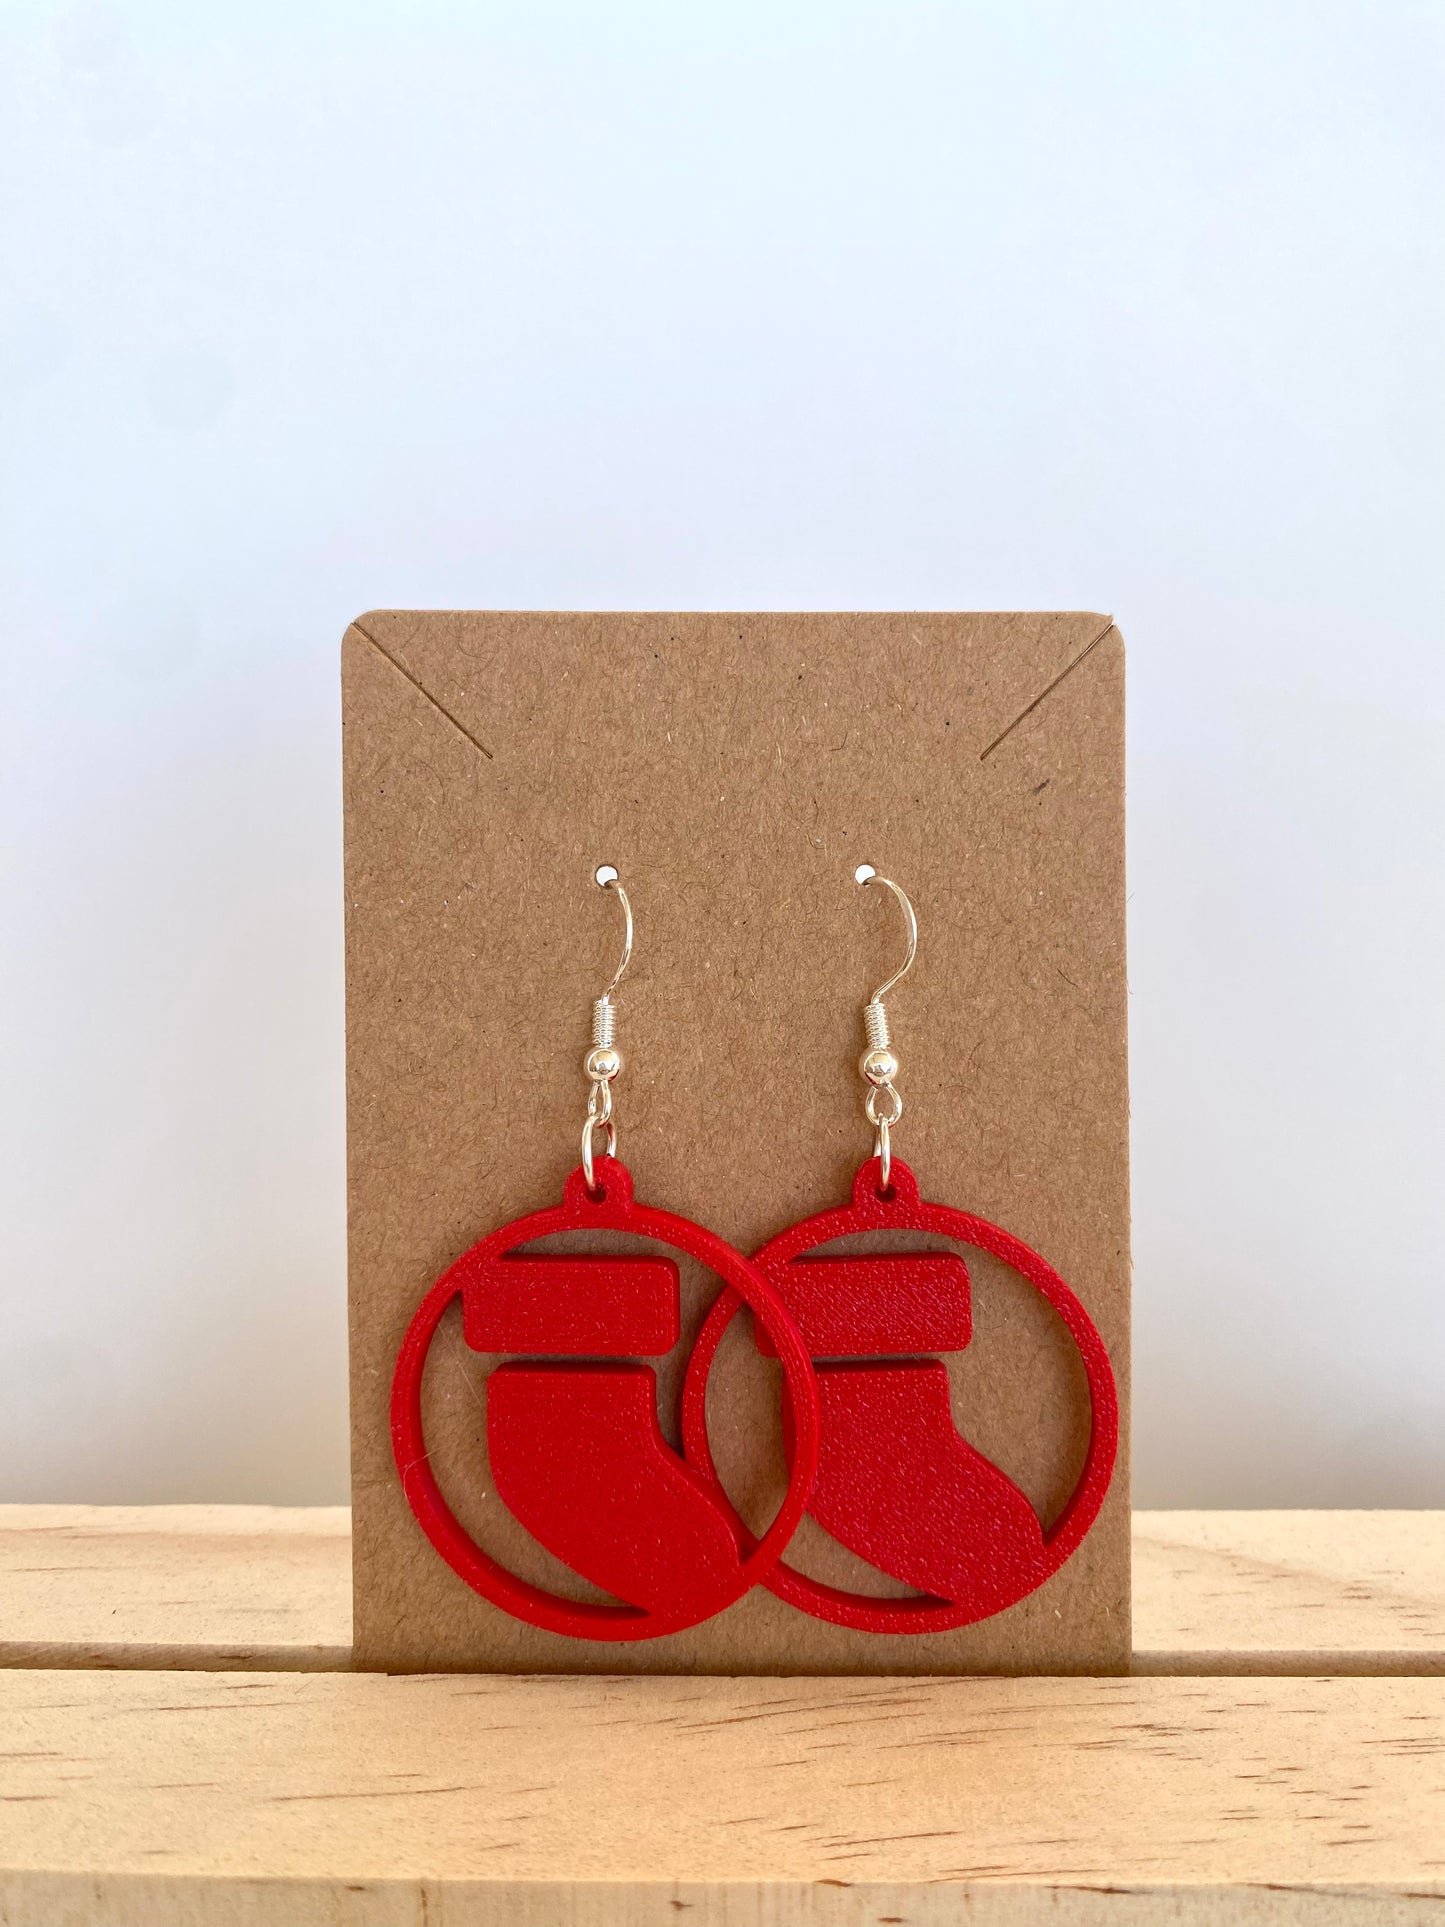 Circle Stocking Earrings in red.